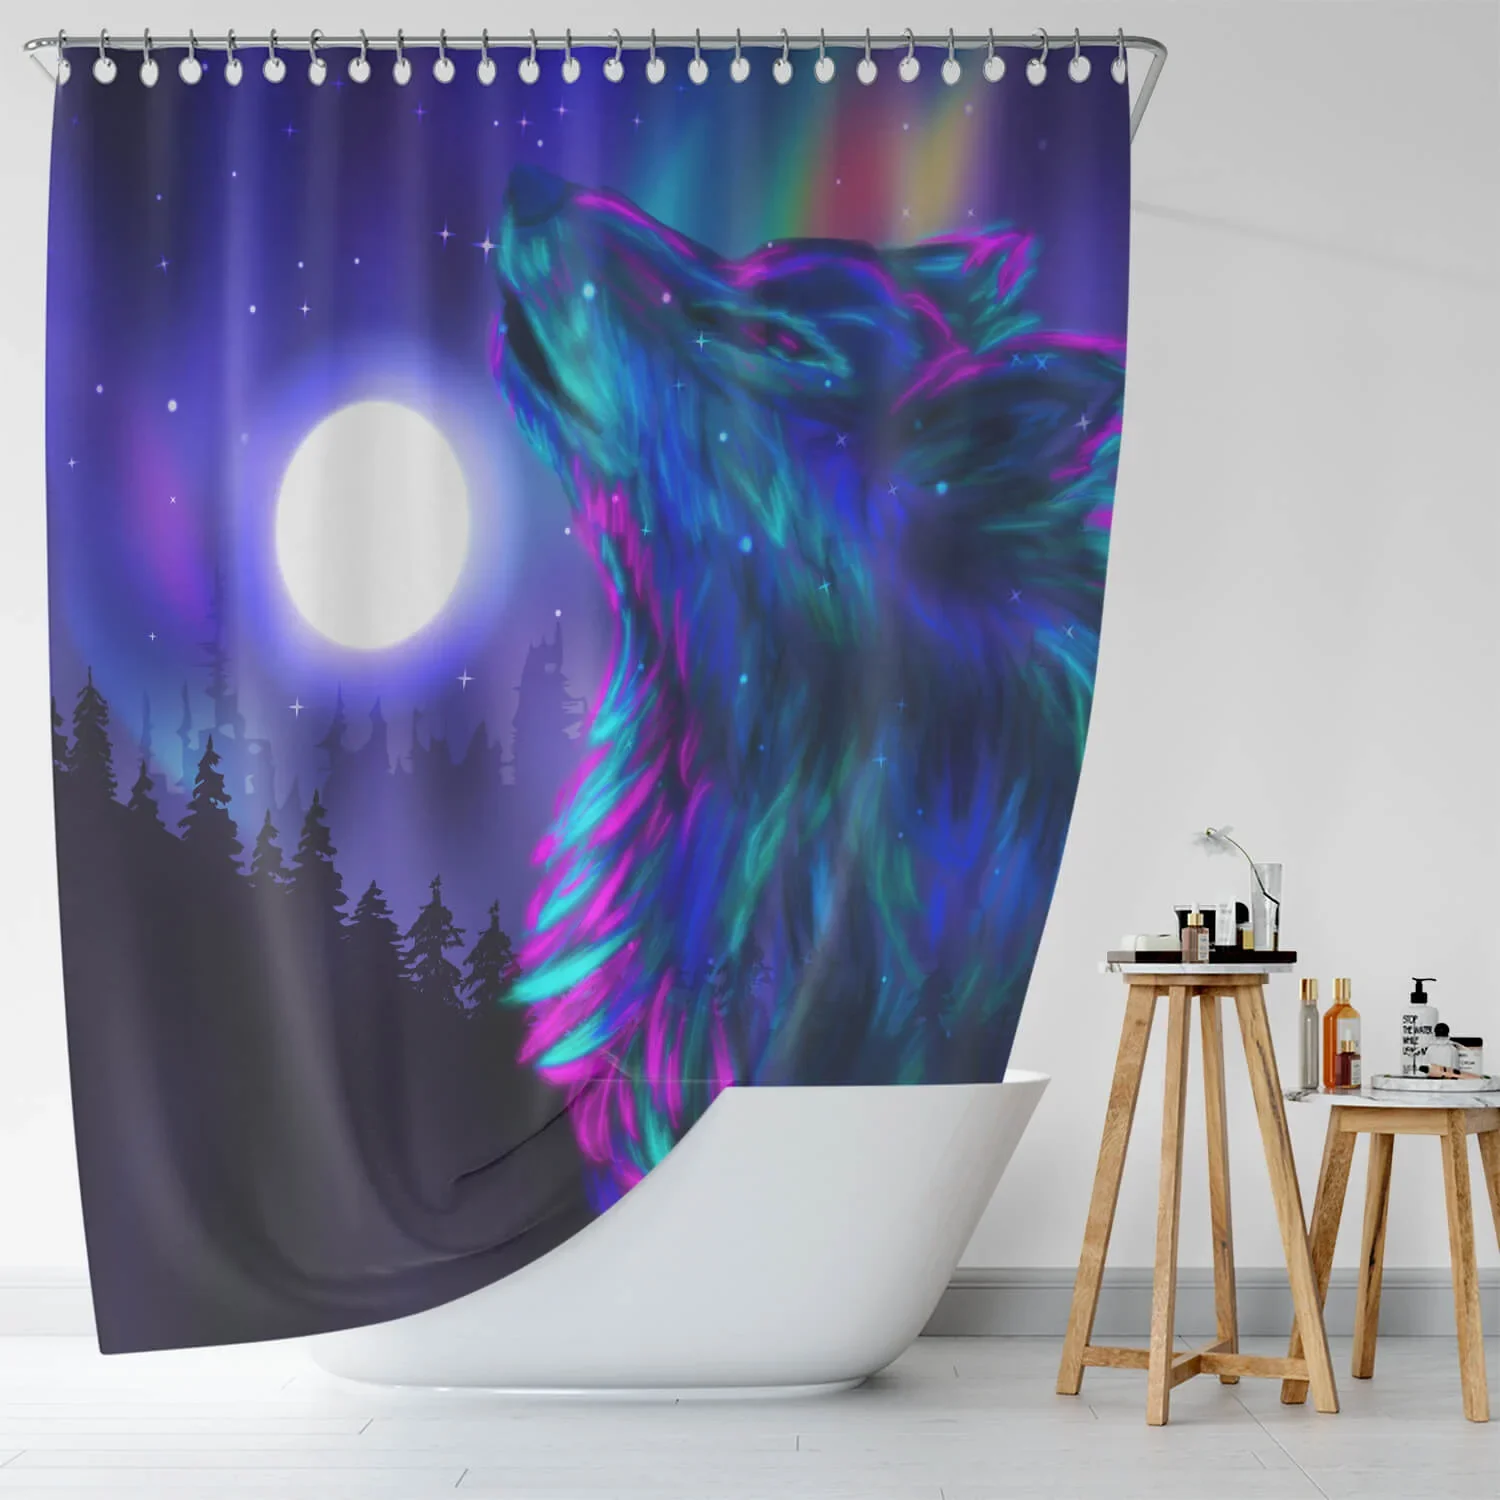 Howling wolf shower curtain - perfect for decorating an apartment bathroom!